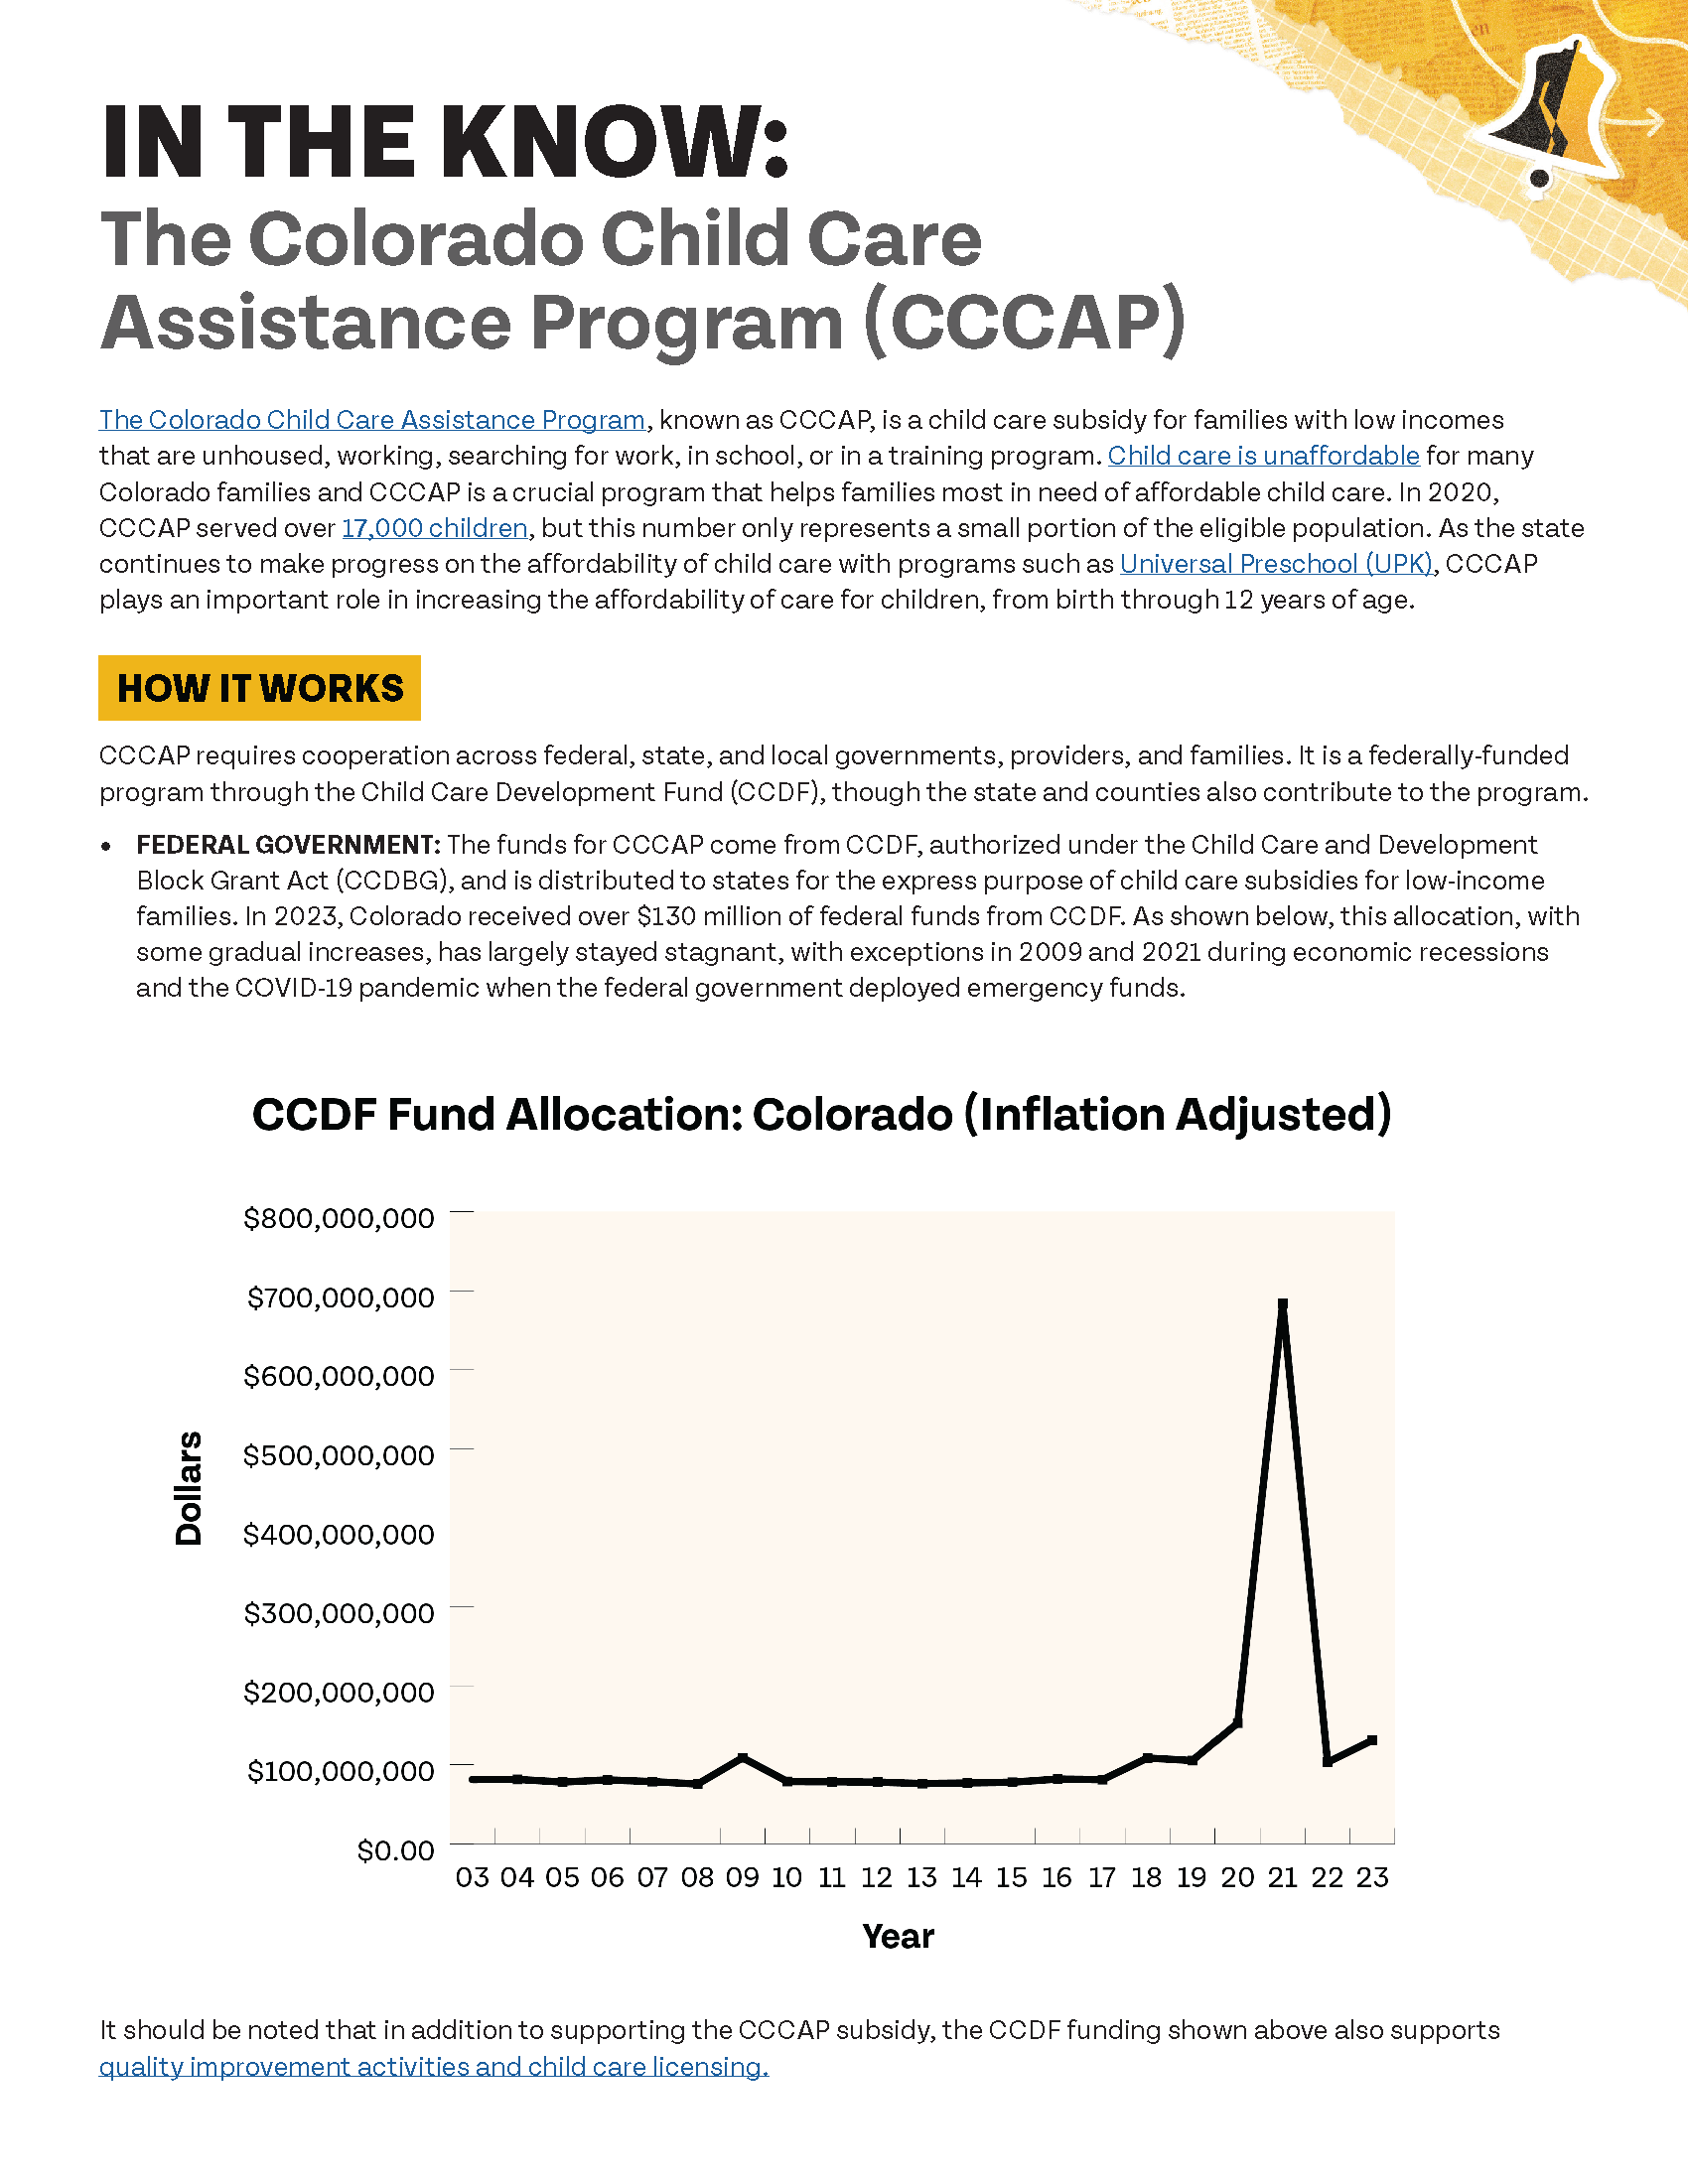 Infographic detailing the Colorado Child Care Assistance Program (CCCAP) information and child care development fund (CCDF) funding over time.